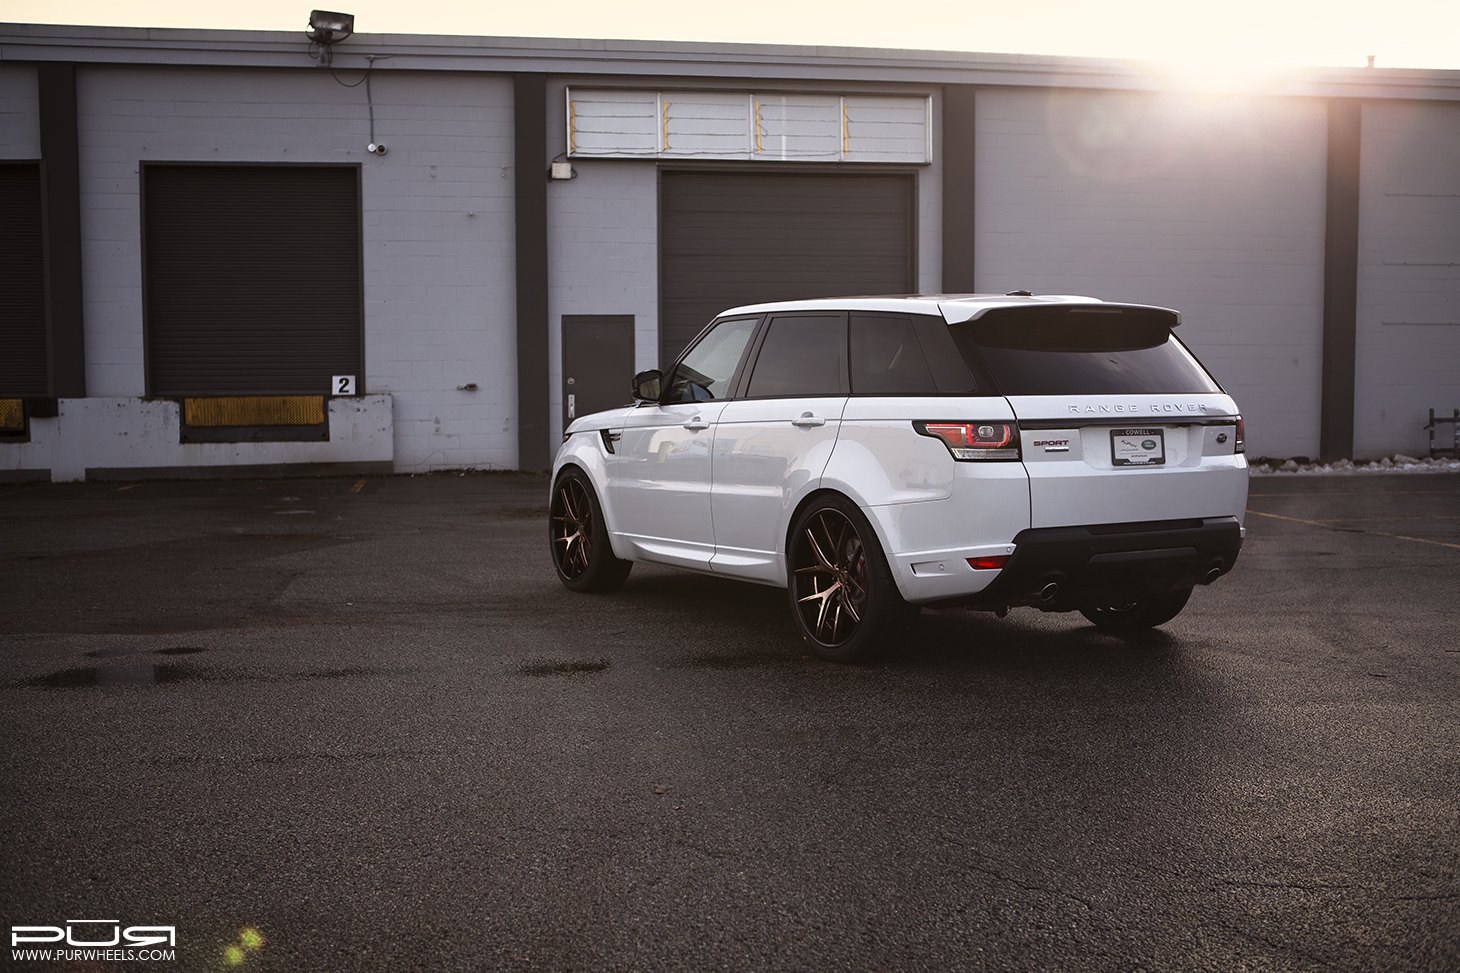 Large Roofline Spoiler on White Range Rover Sport - Photo by PUR Wheels